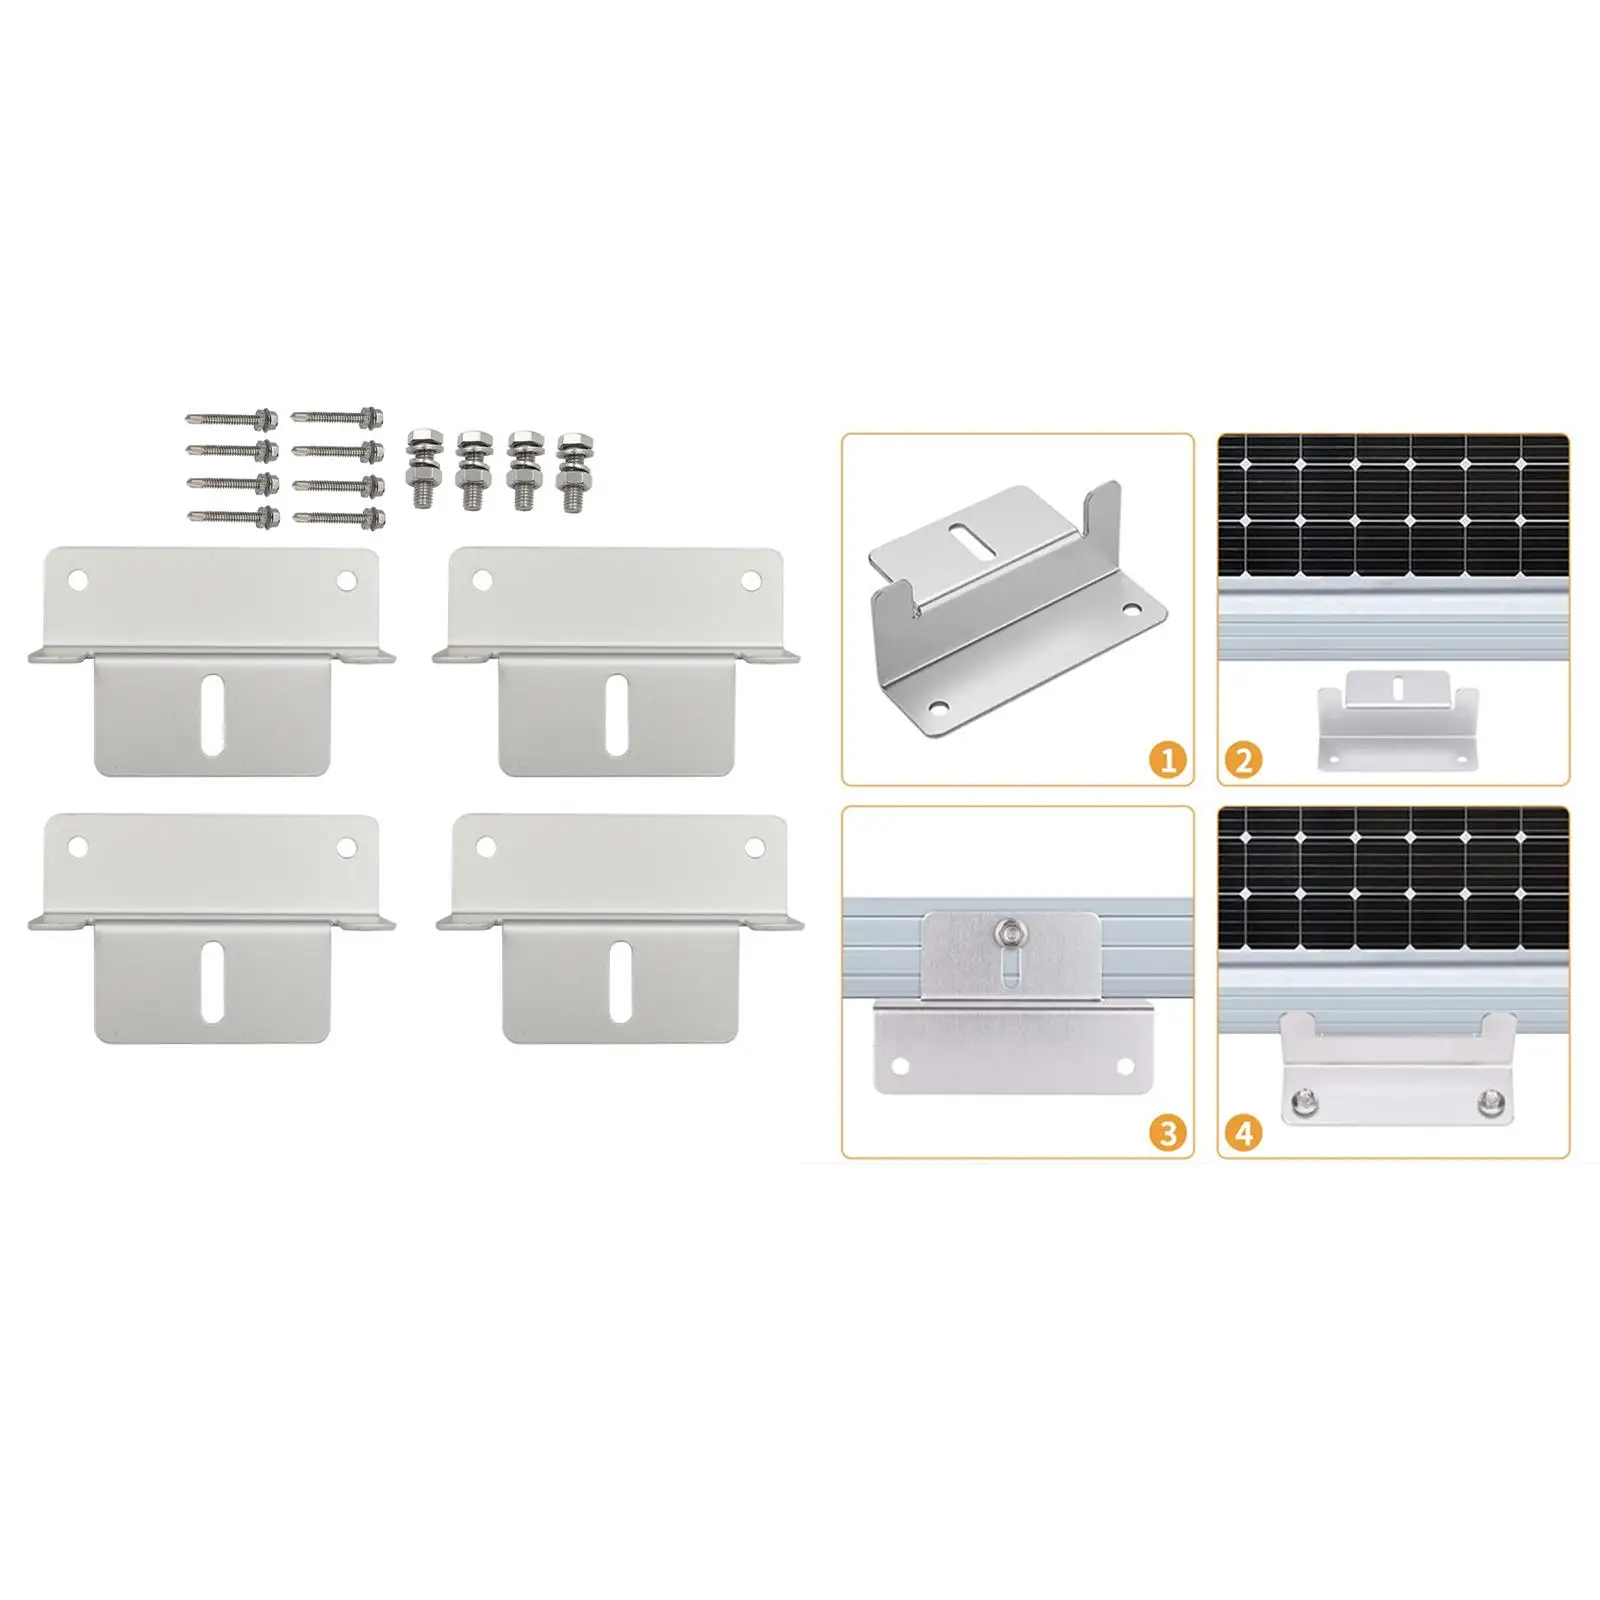 Solar Panel Mounting Brackets Aluminum Alloy Quality with Nuts and Bolts Install Accessories for Off Grid Trailers Yacht RV